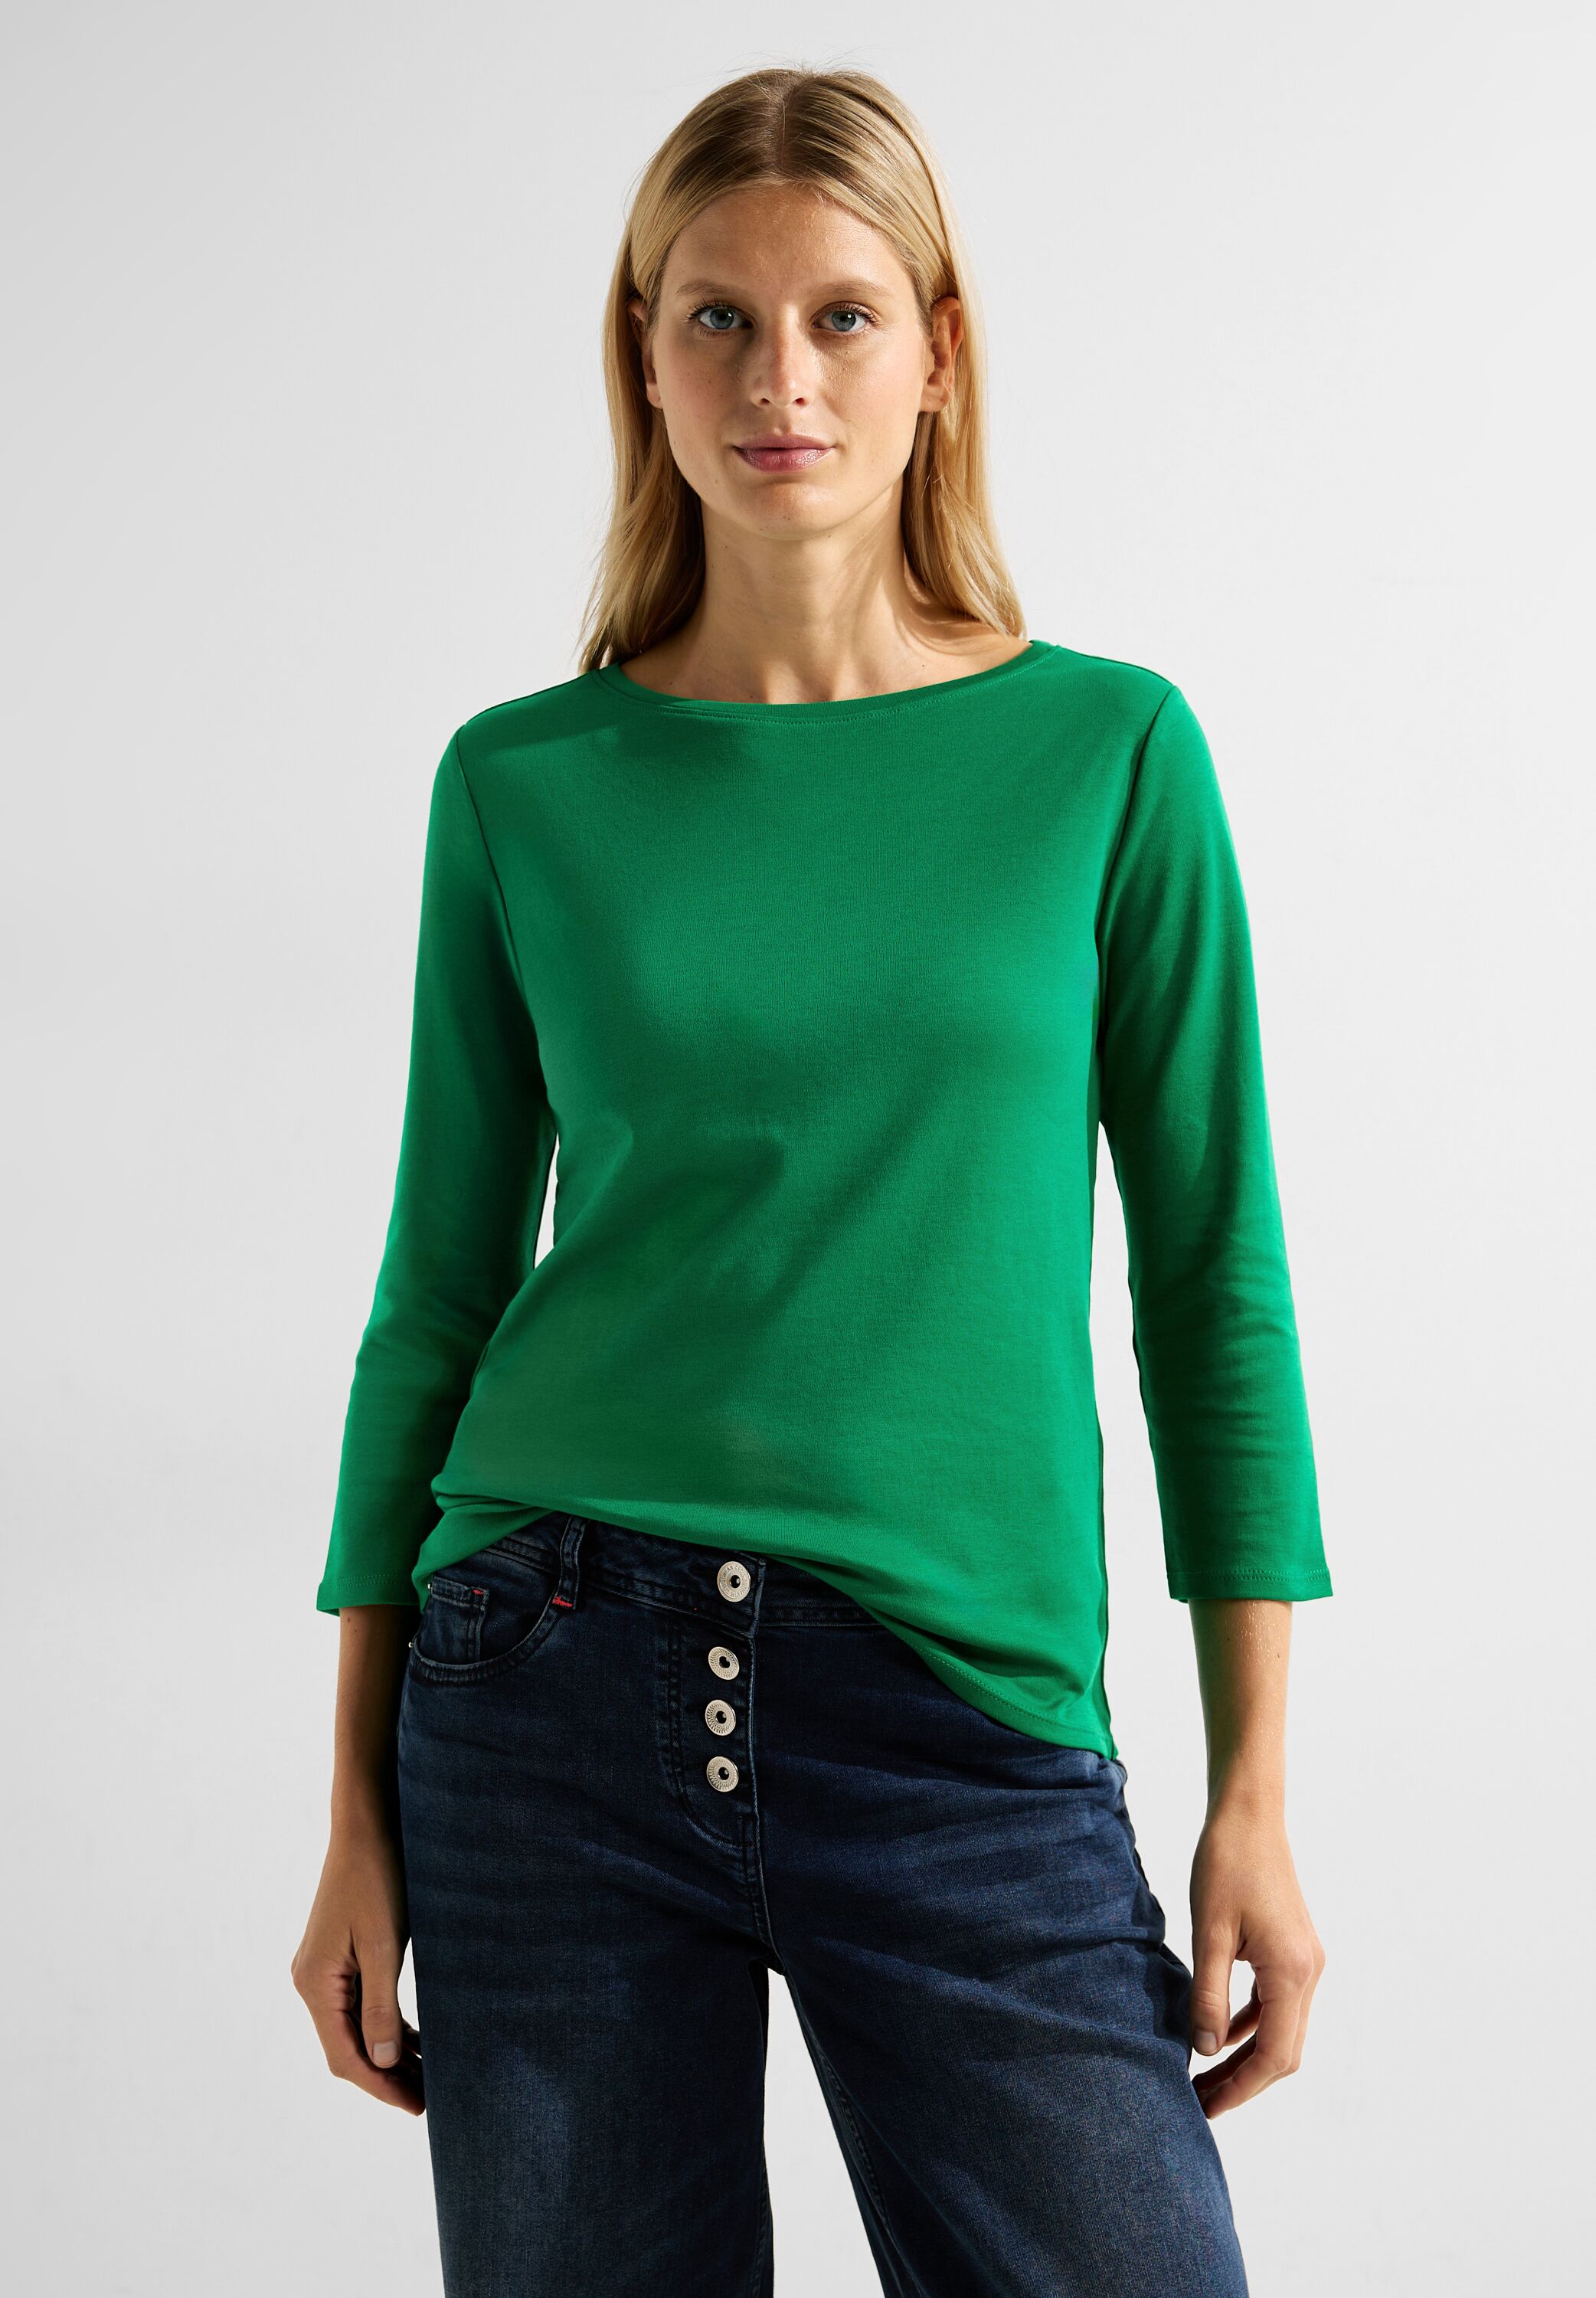 CECIL Shirt in Easy Green - B317389-15069 CONCEPT Mode